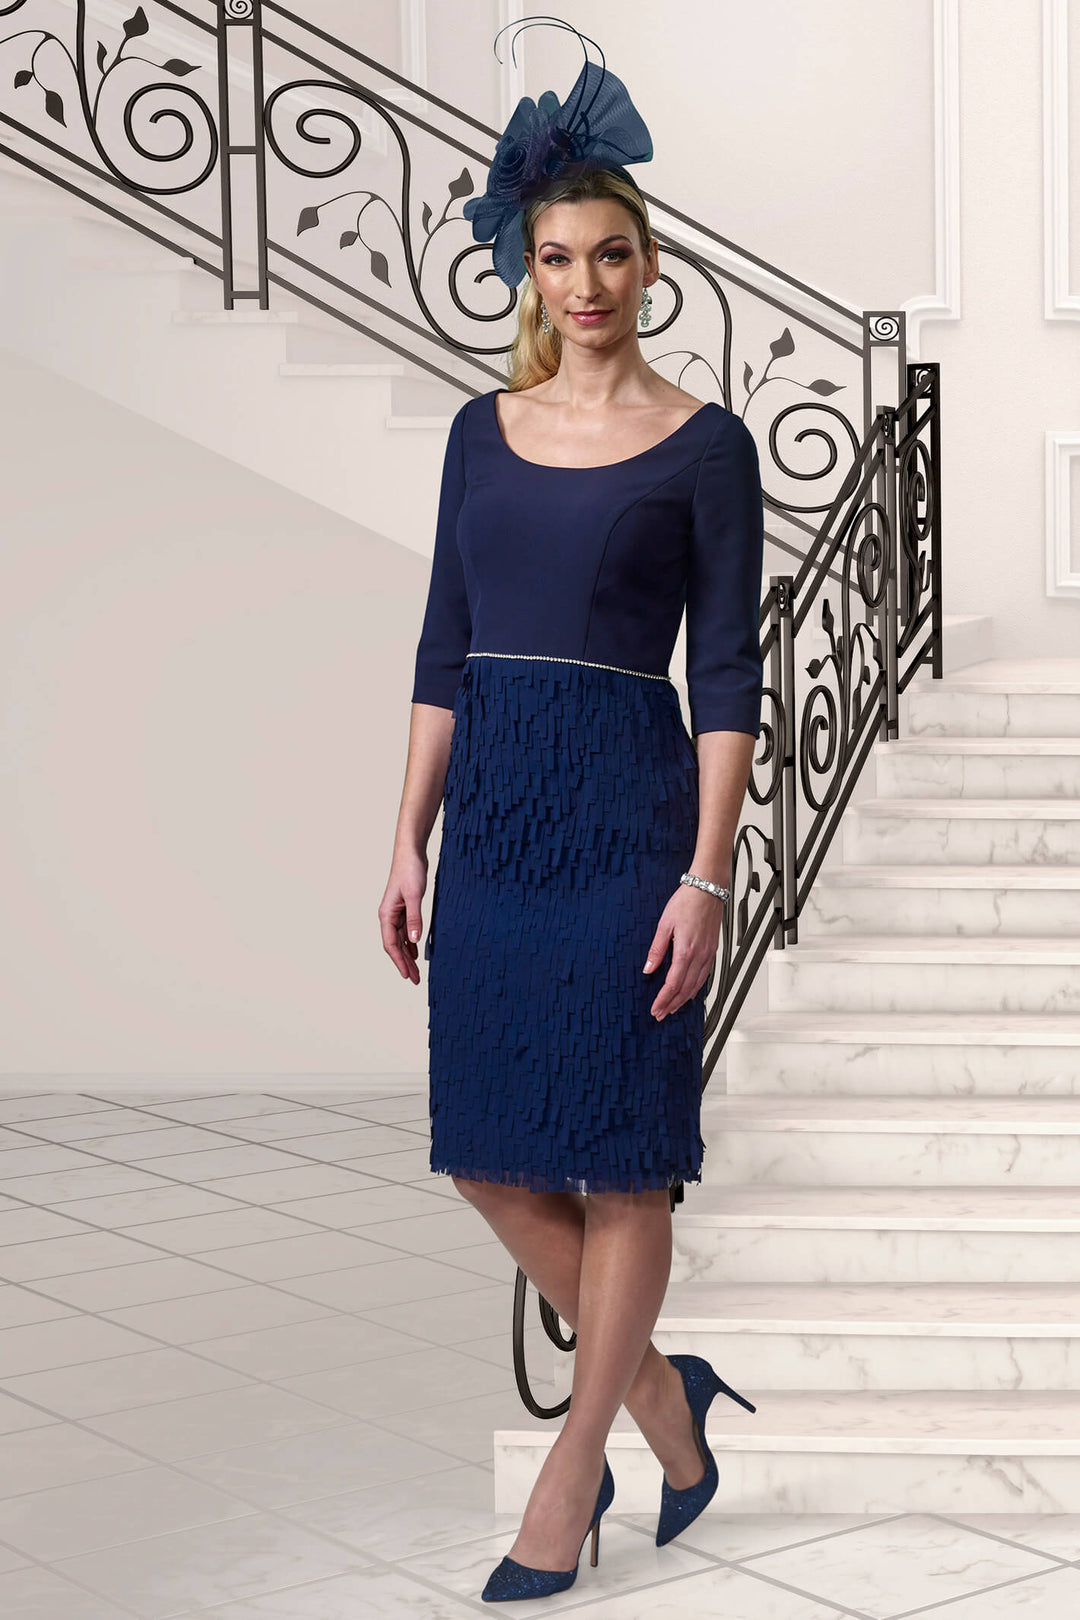 Veromia VO9688 Navy Layered Skirt Occasion Dress - Dotique